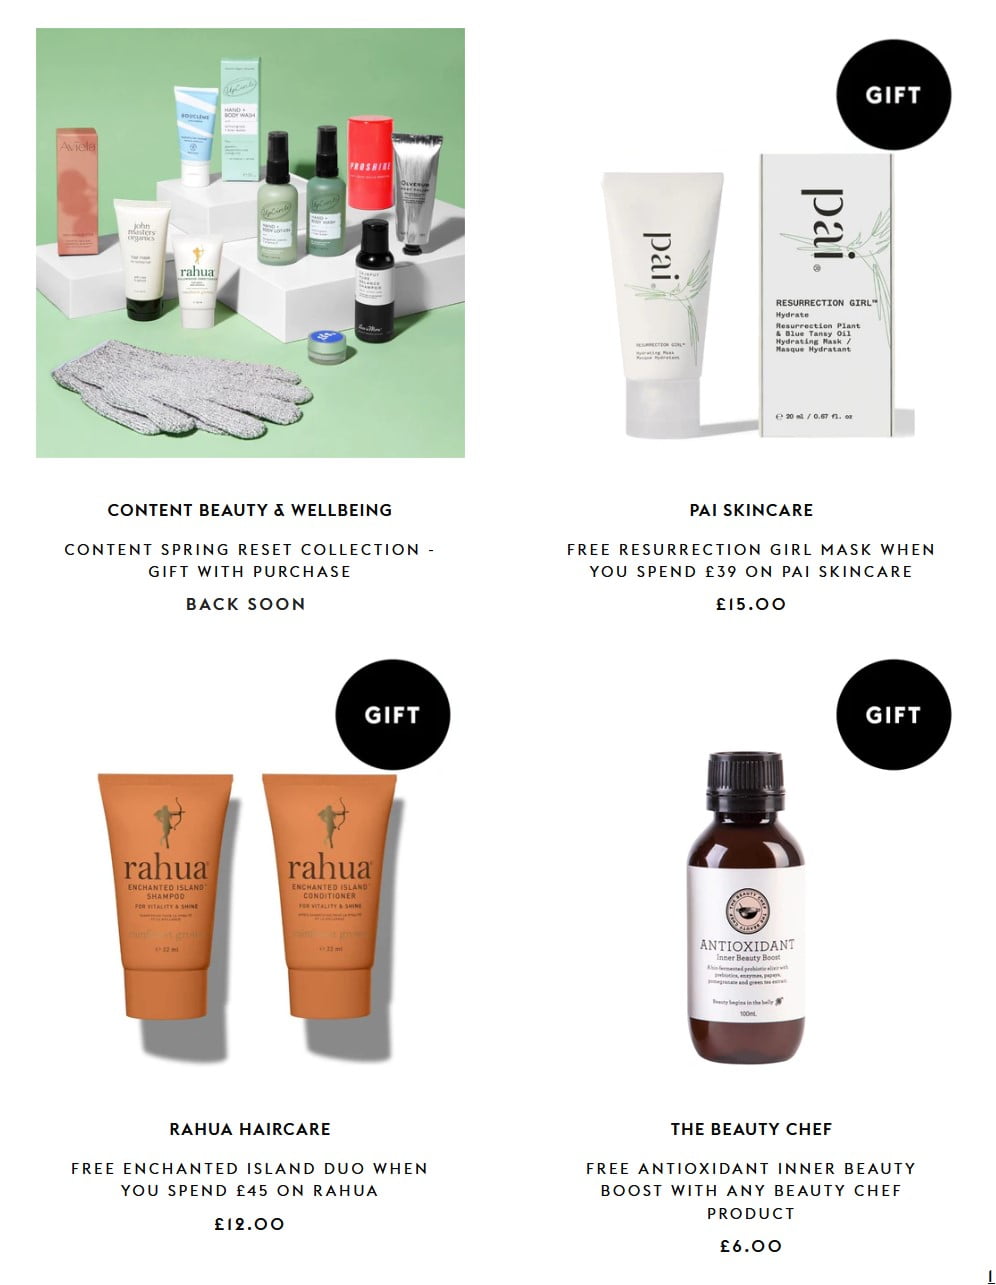 Gift with purchase offers at Content Beauty & Wellbeing